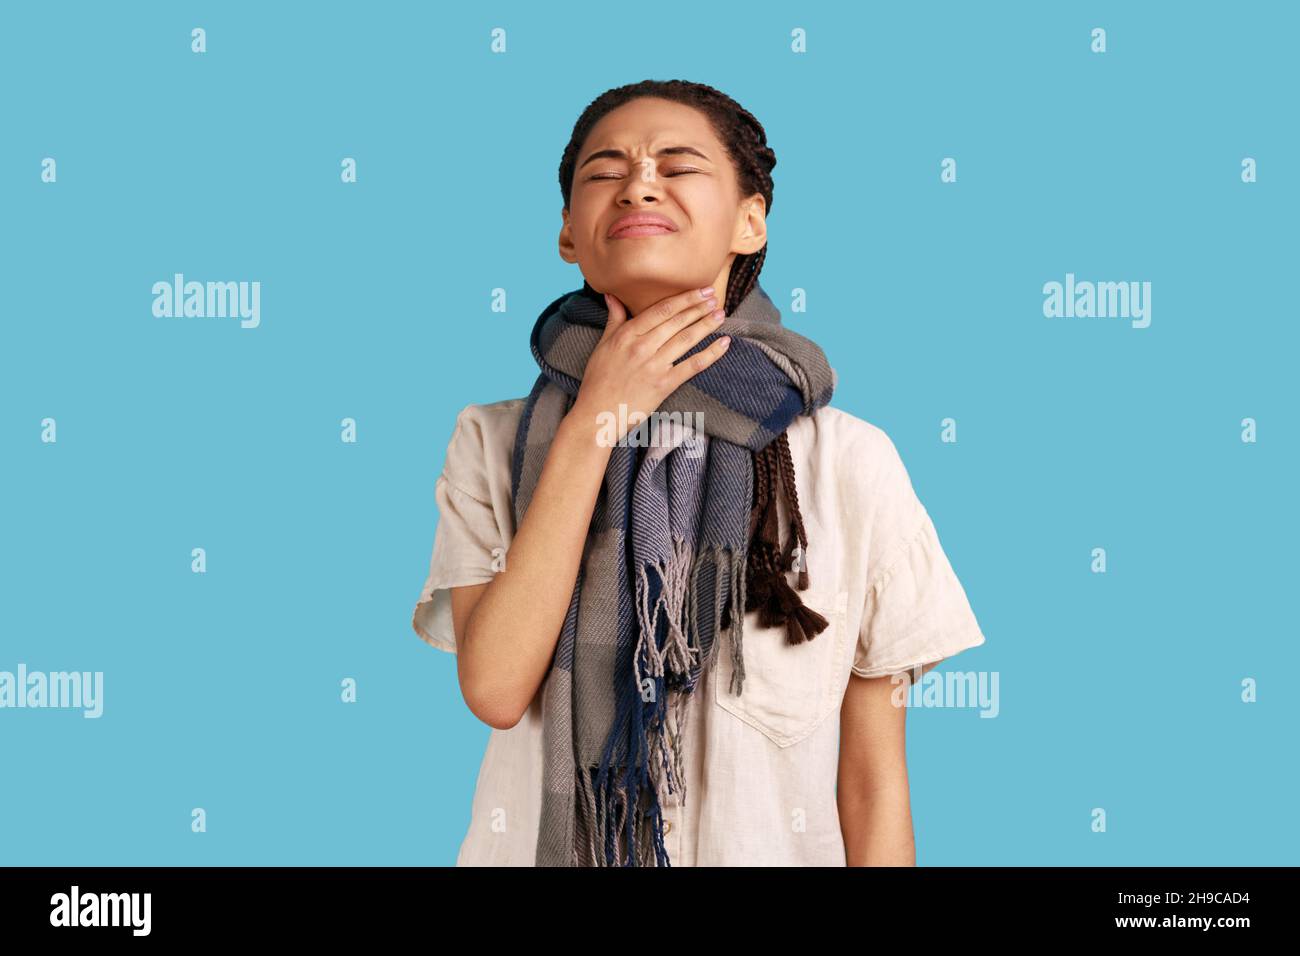 Unhappy sick woman wrapped in scarf, touches neck, suffers from sore throat, cant breath well, chokes and smirks face, feels discomfort and suffocation. Indoor studio shot isolated on blue background. Stock Photo